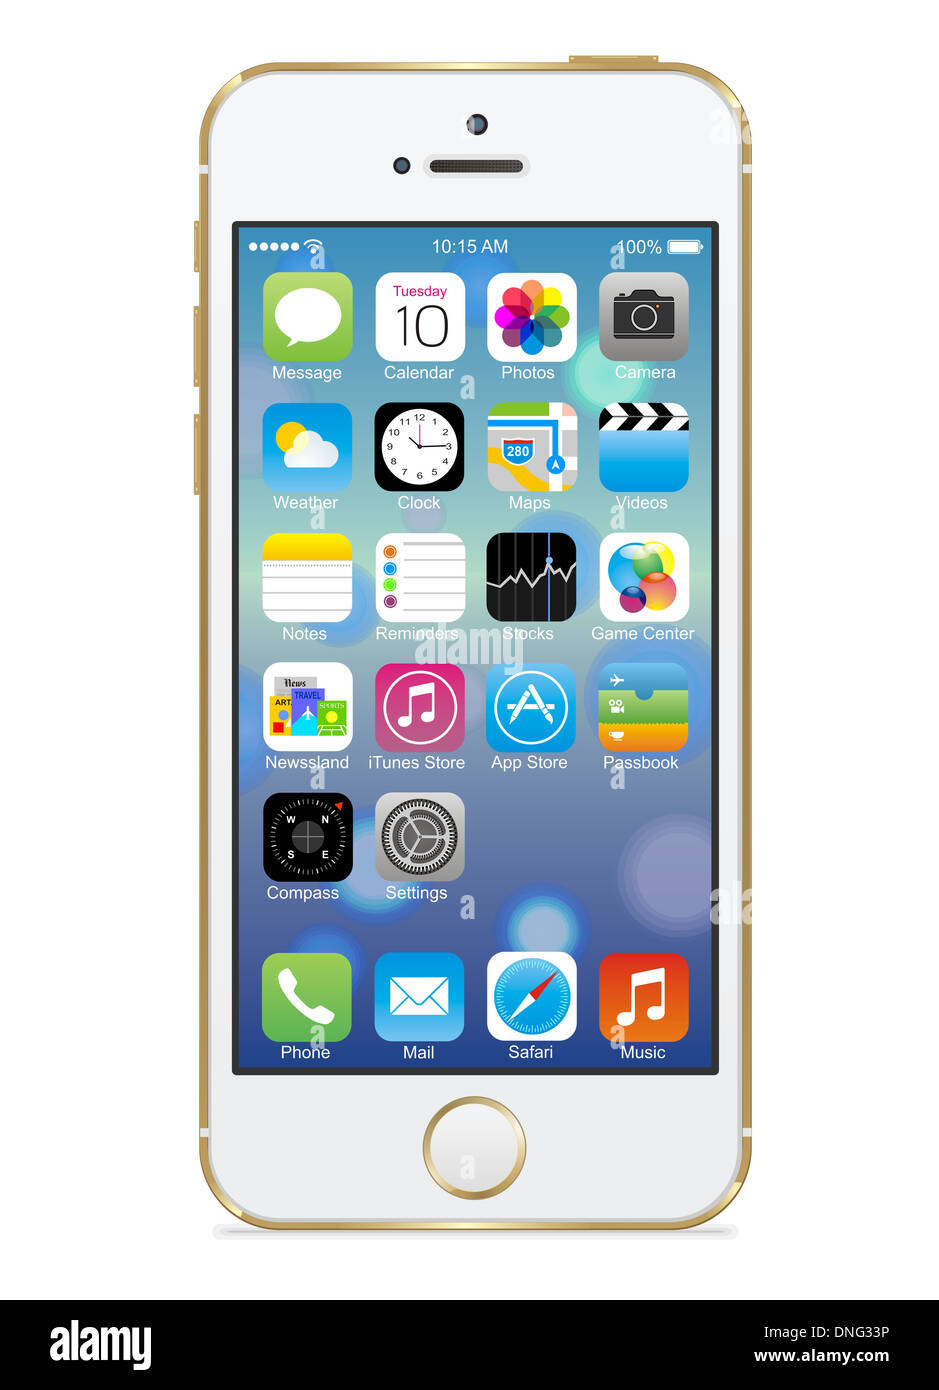 Apple iphone 5s  with icon on screen Stock Photo